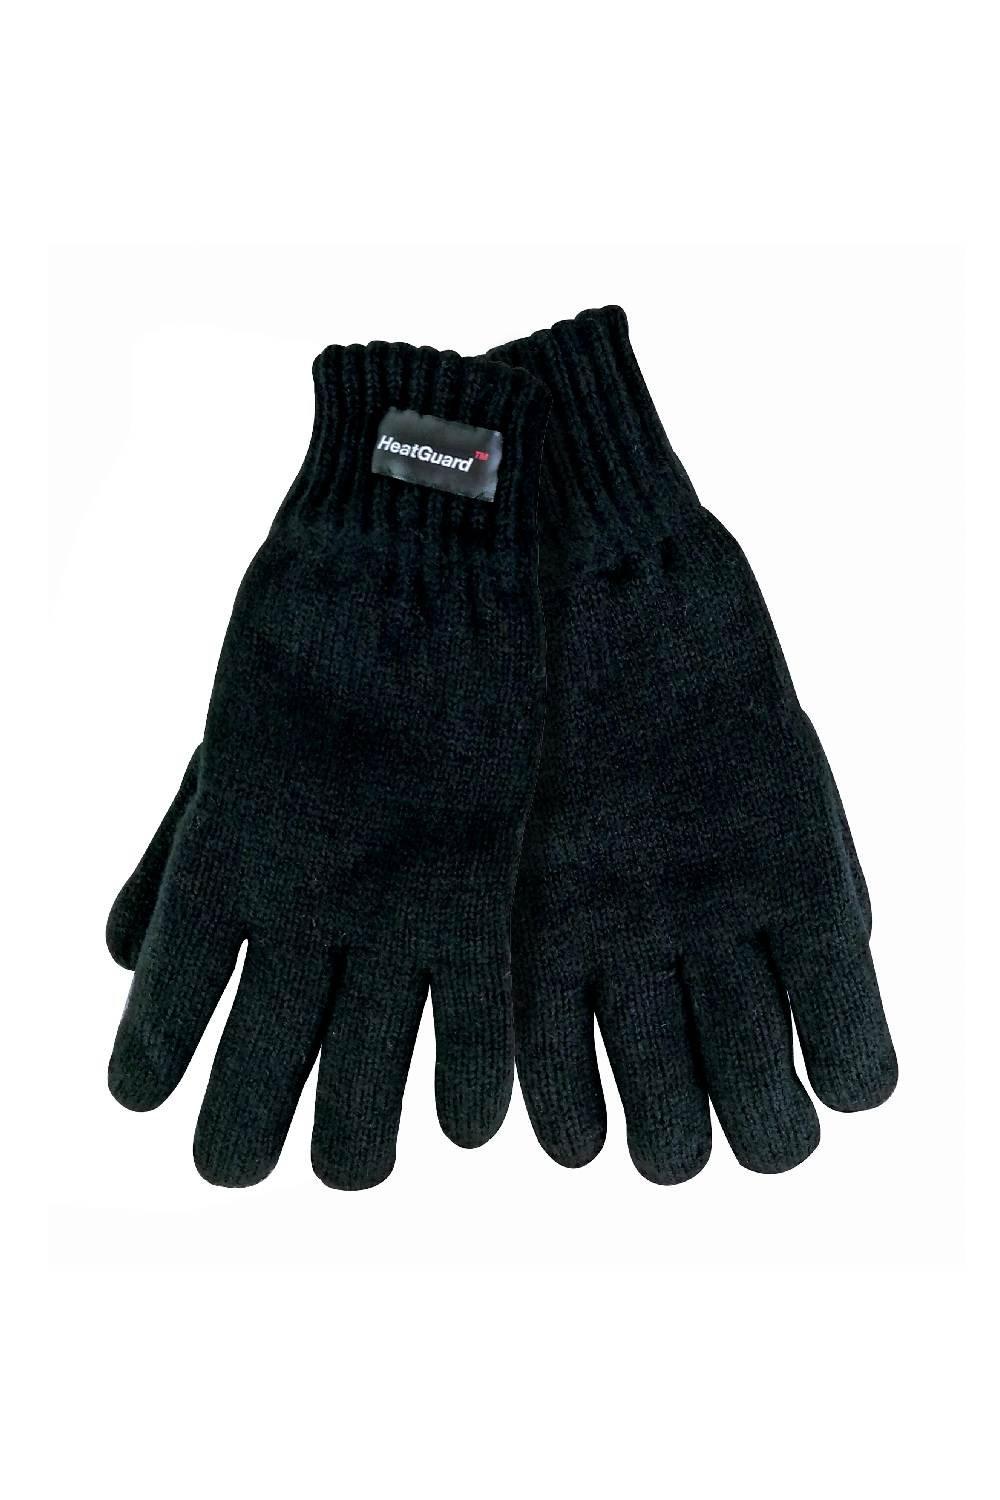 Soft Thermal Winter Knitted Gloves